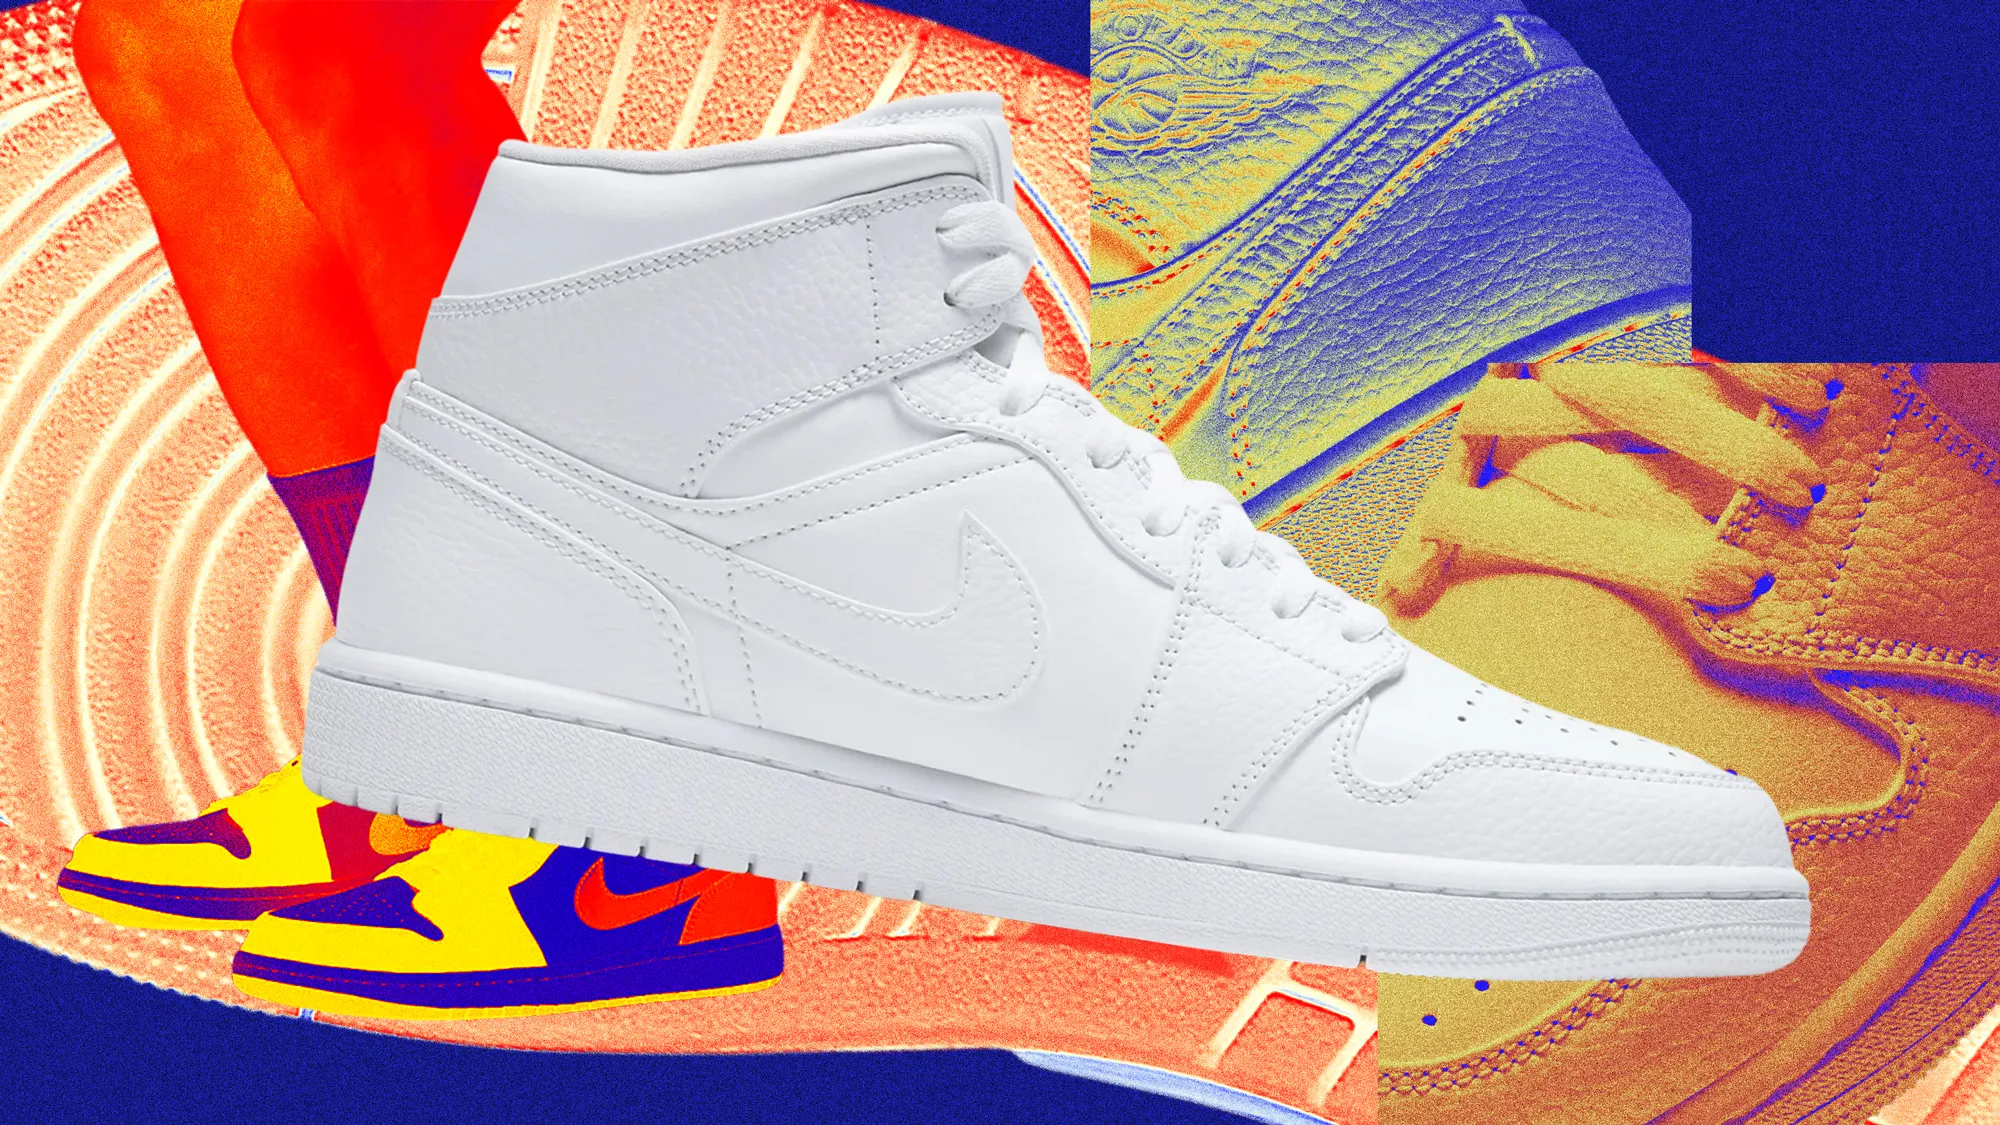 Air Jordan 1 Mid: The perfect balance between style and comfort